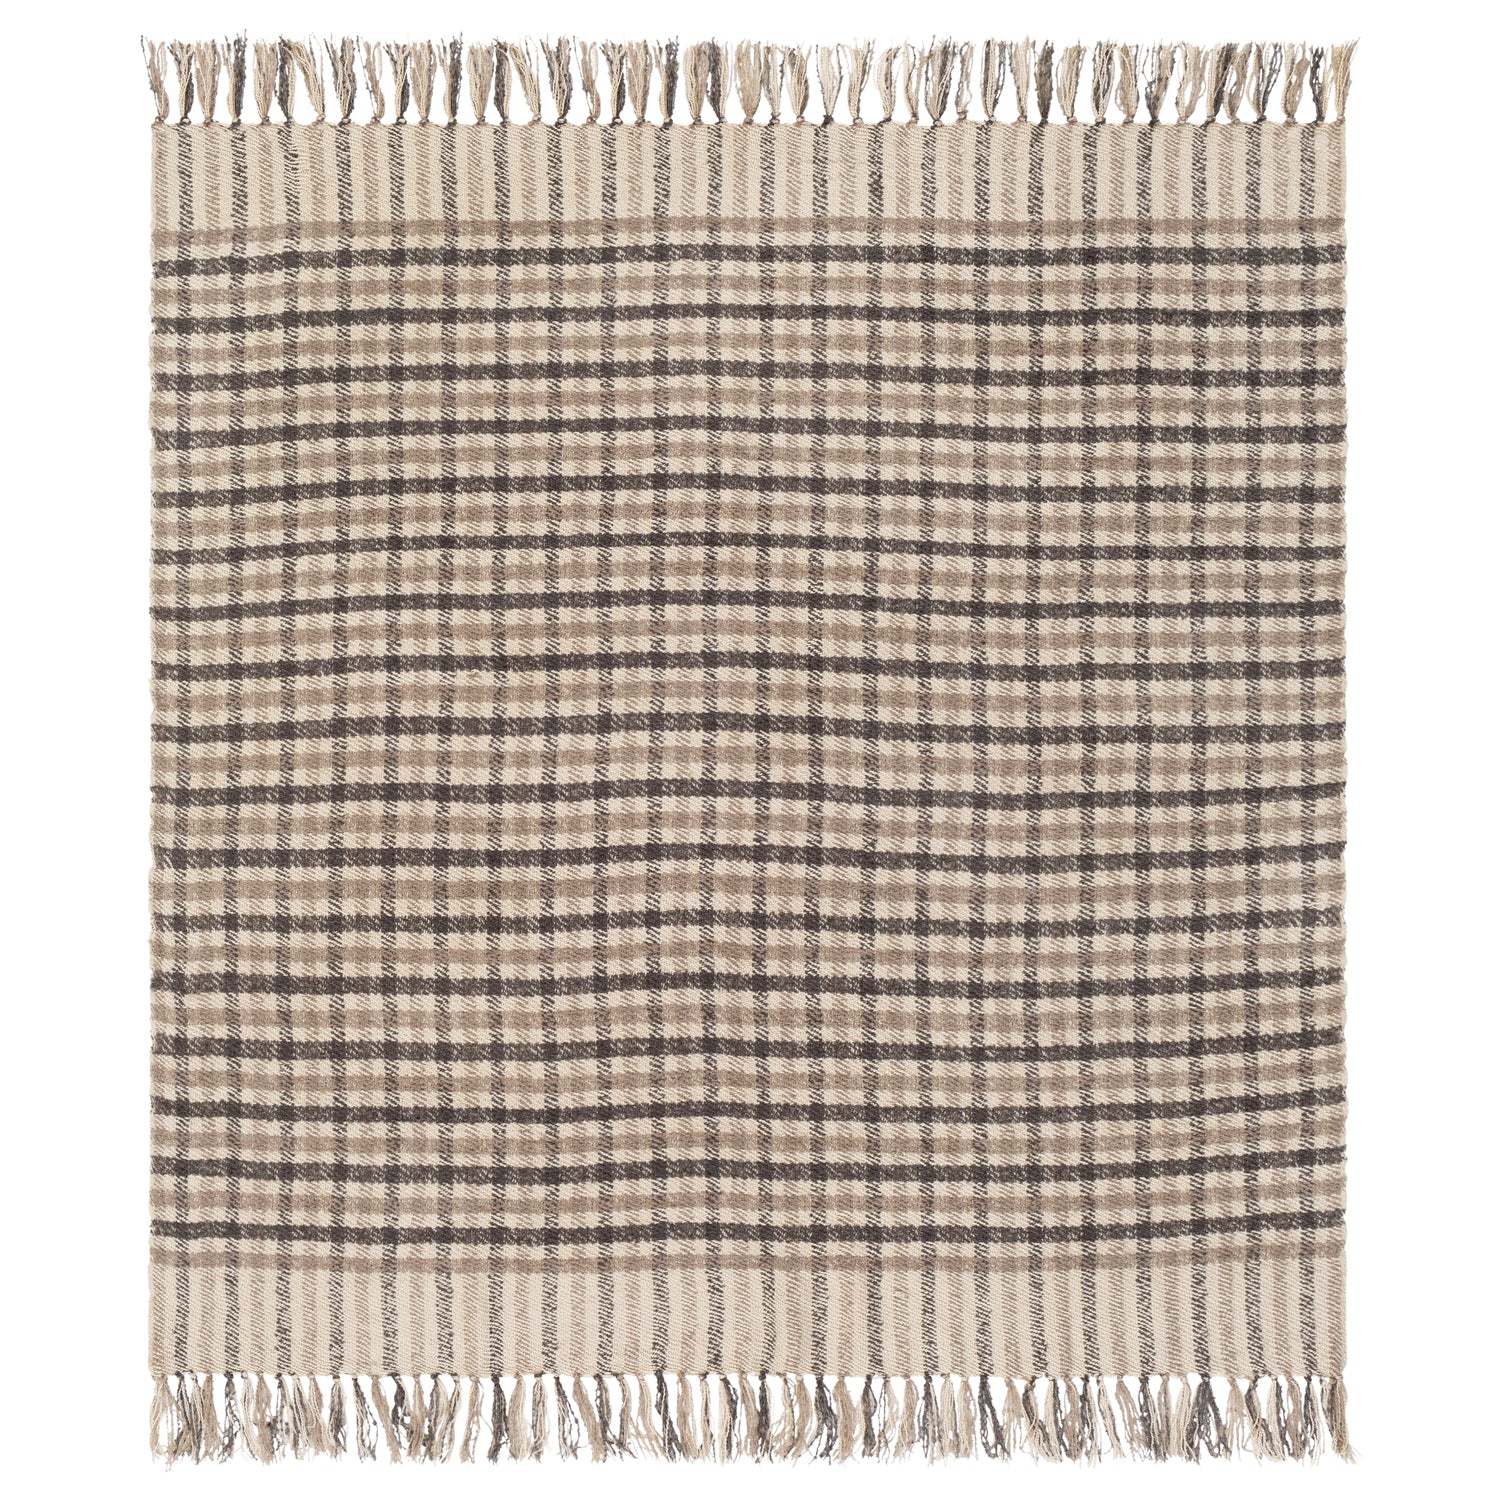 Orchard Throw Blanket – Paynes Gray